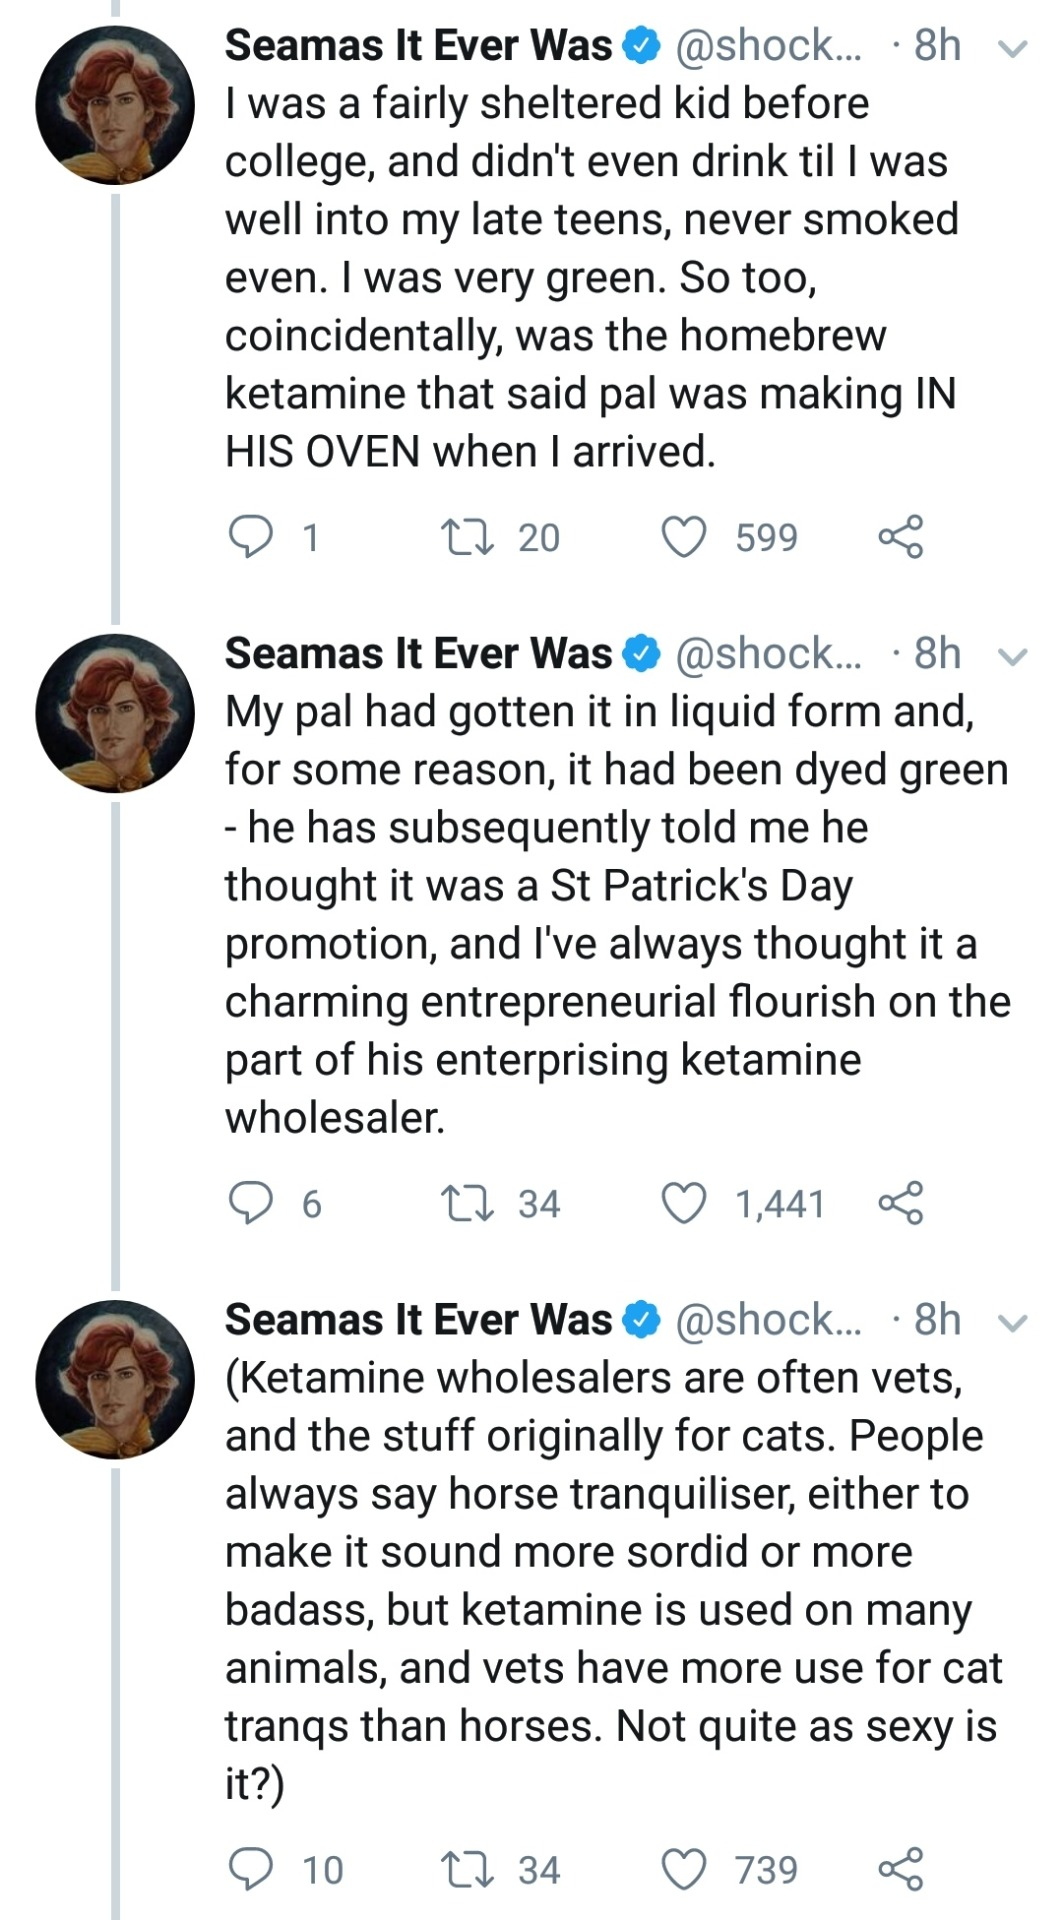 tweet - Seamas It Ever Was ... 8h I was a fairly sheltered kid before college, and didn't even drink til I was well into my late teens, never smoked even. I was very green. So too, coincidentally, was the homebrew ketamine that said pal was making In His 